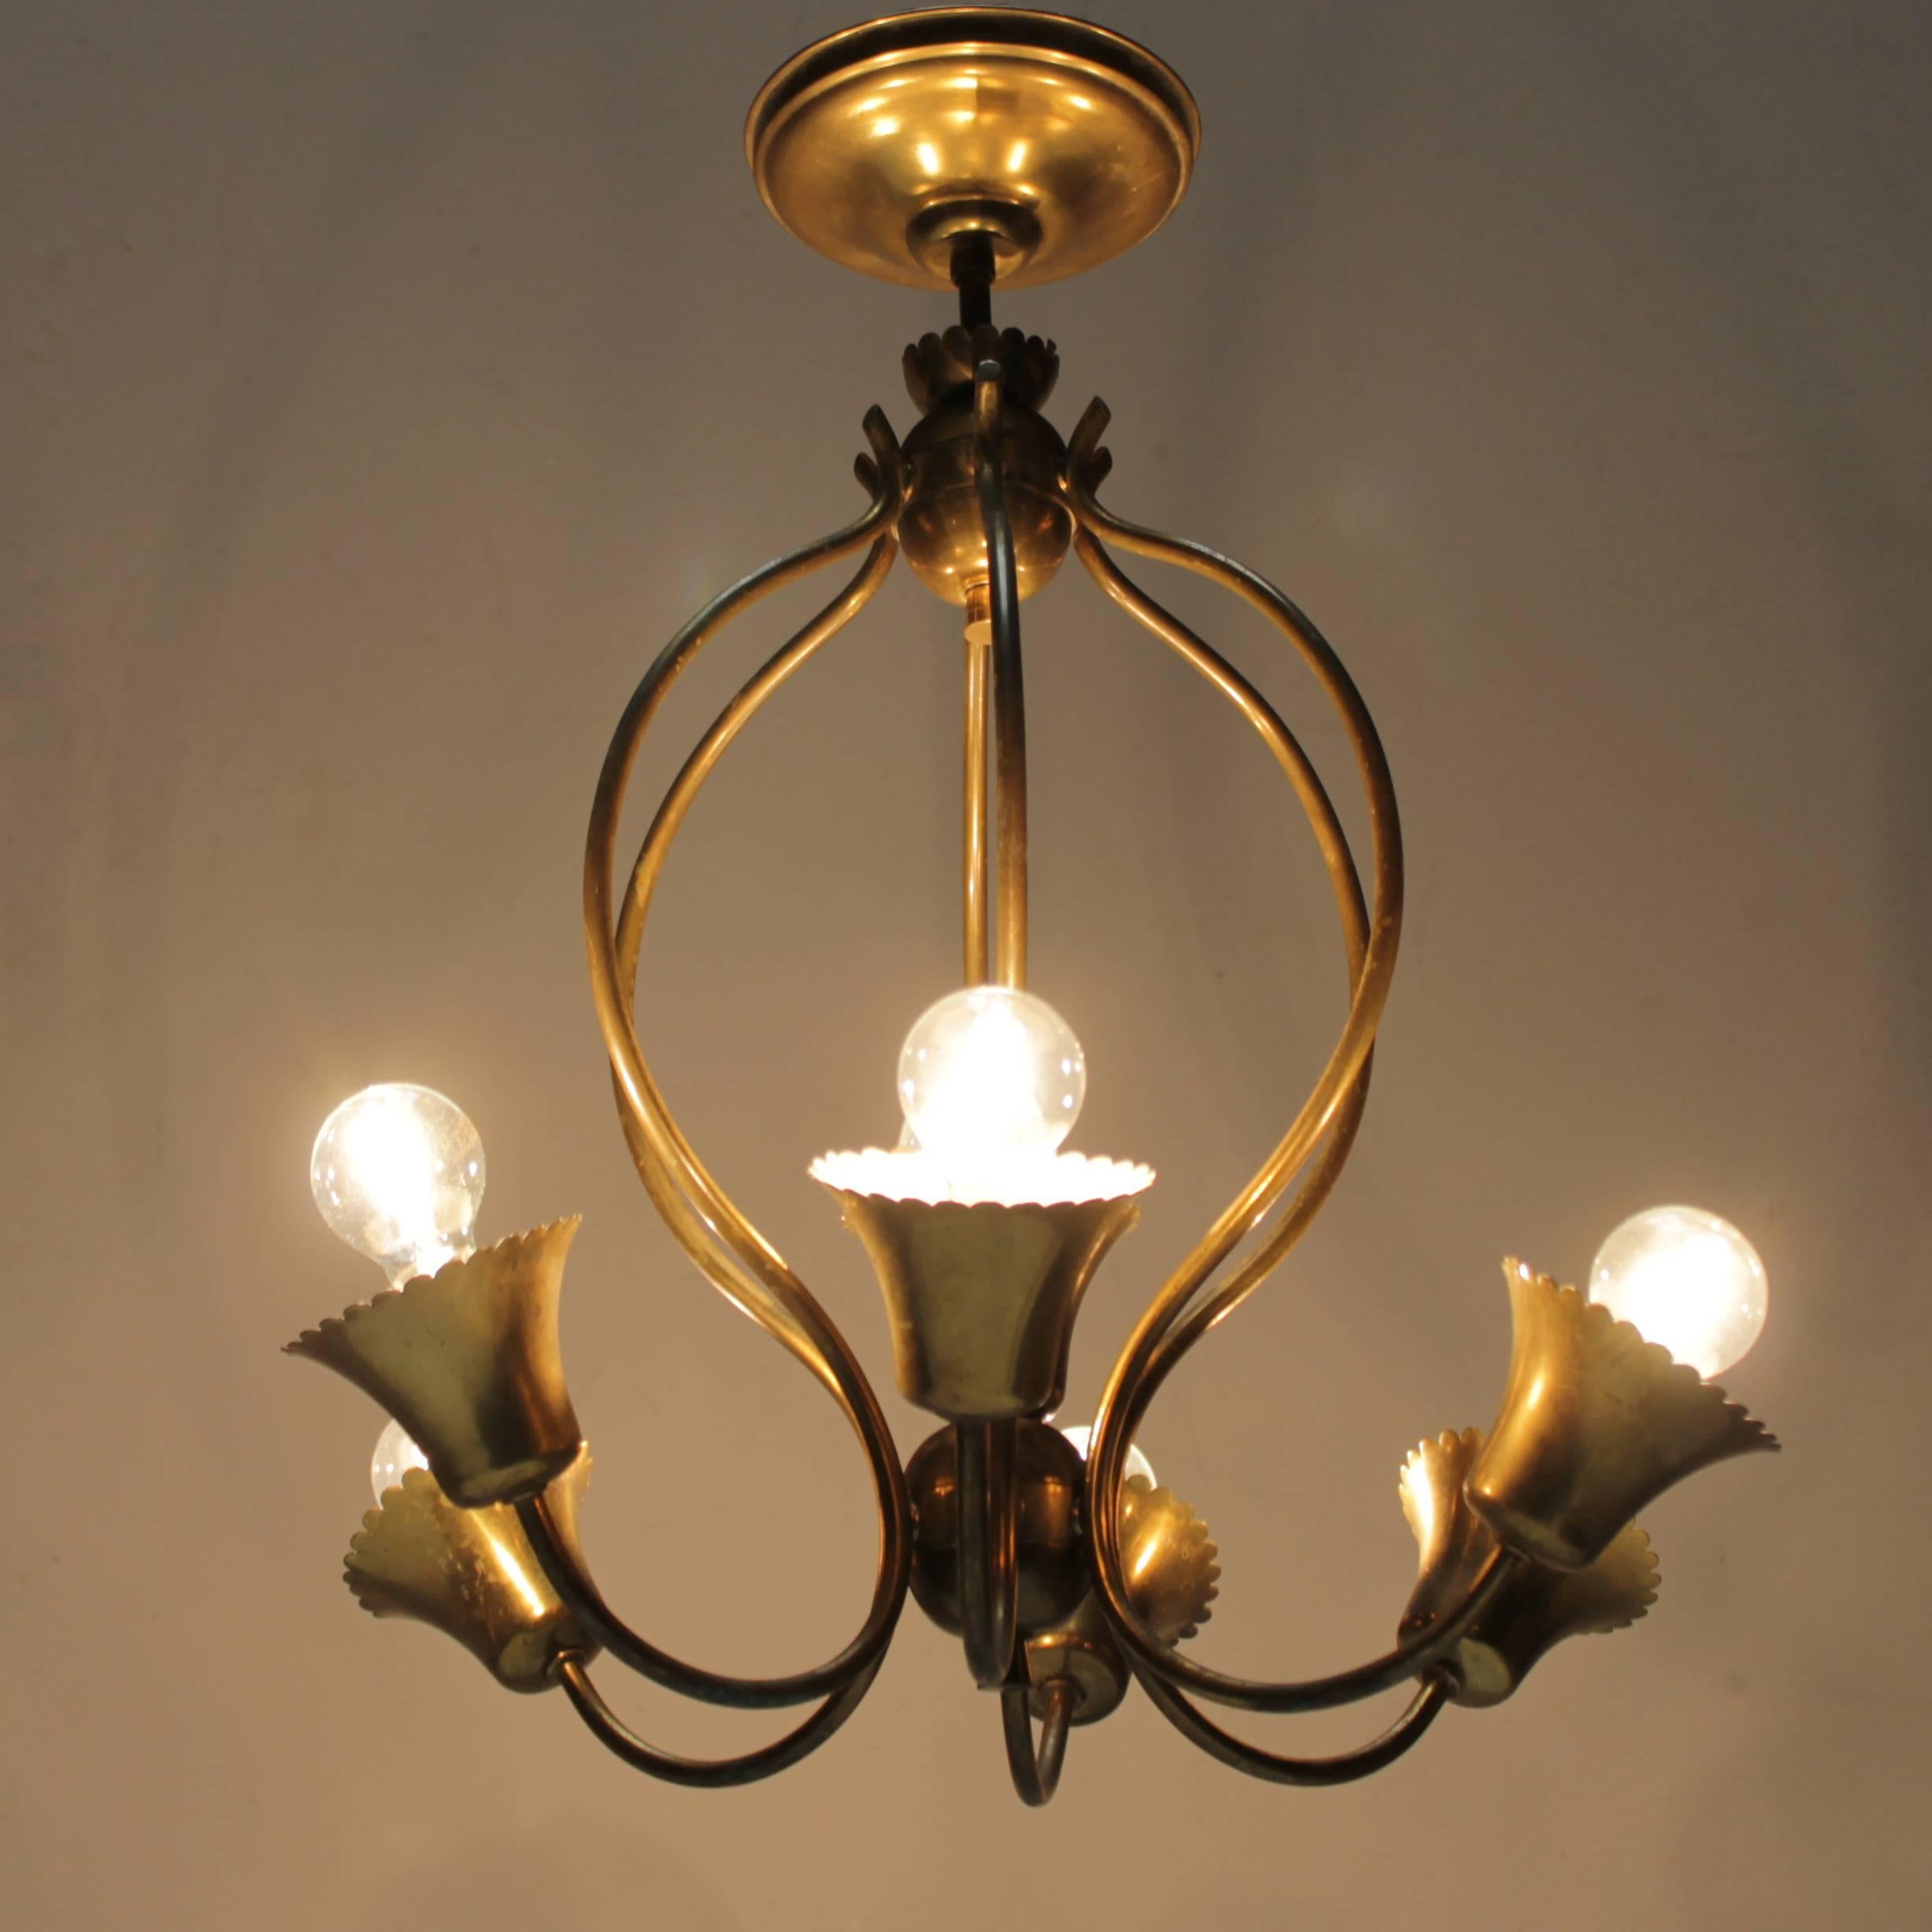 Mid-20th Century Italian Chandelier attributed to Arredoluce